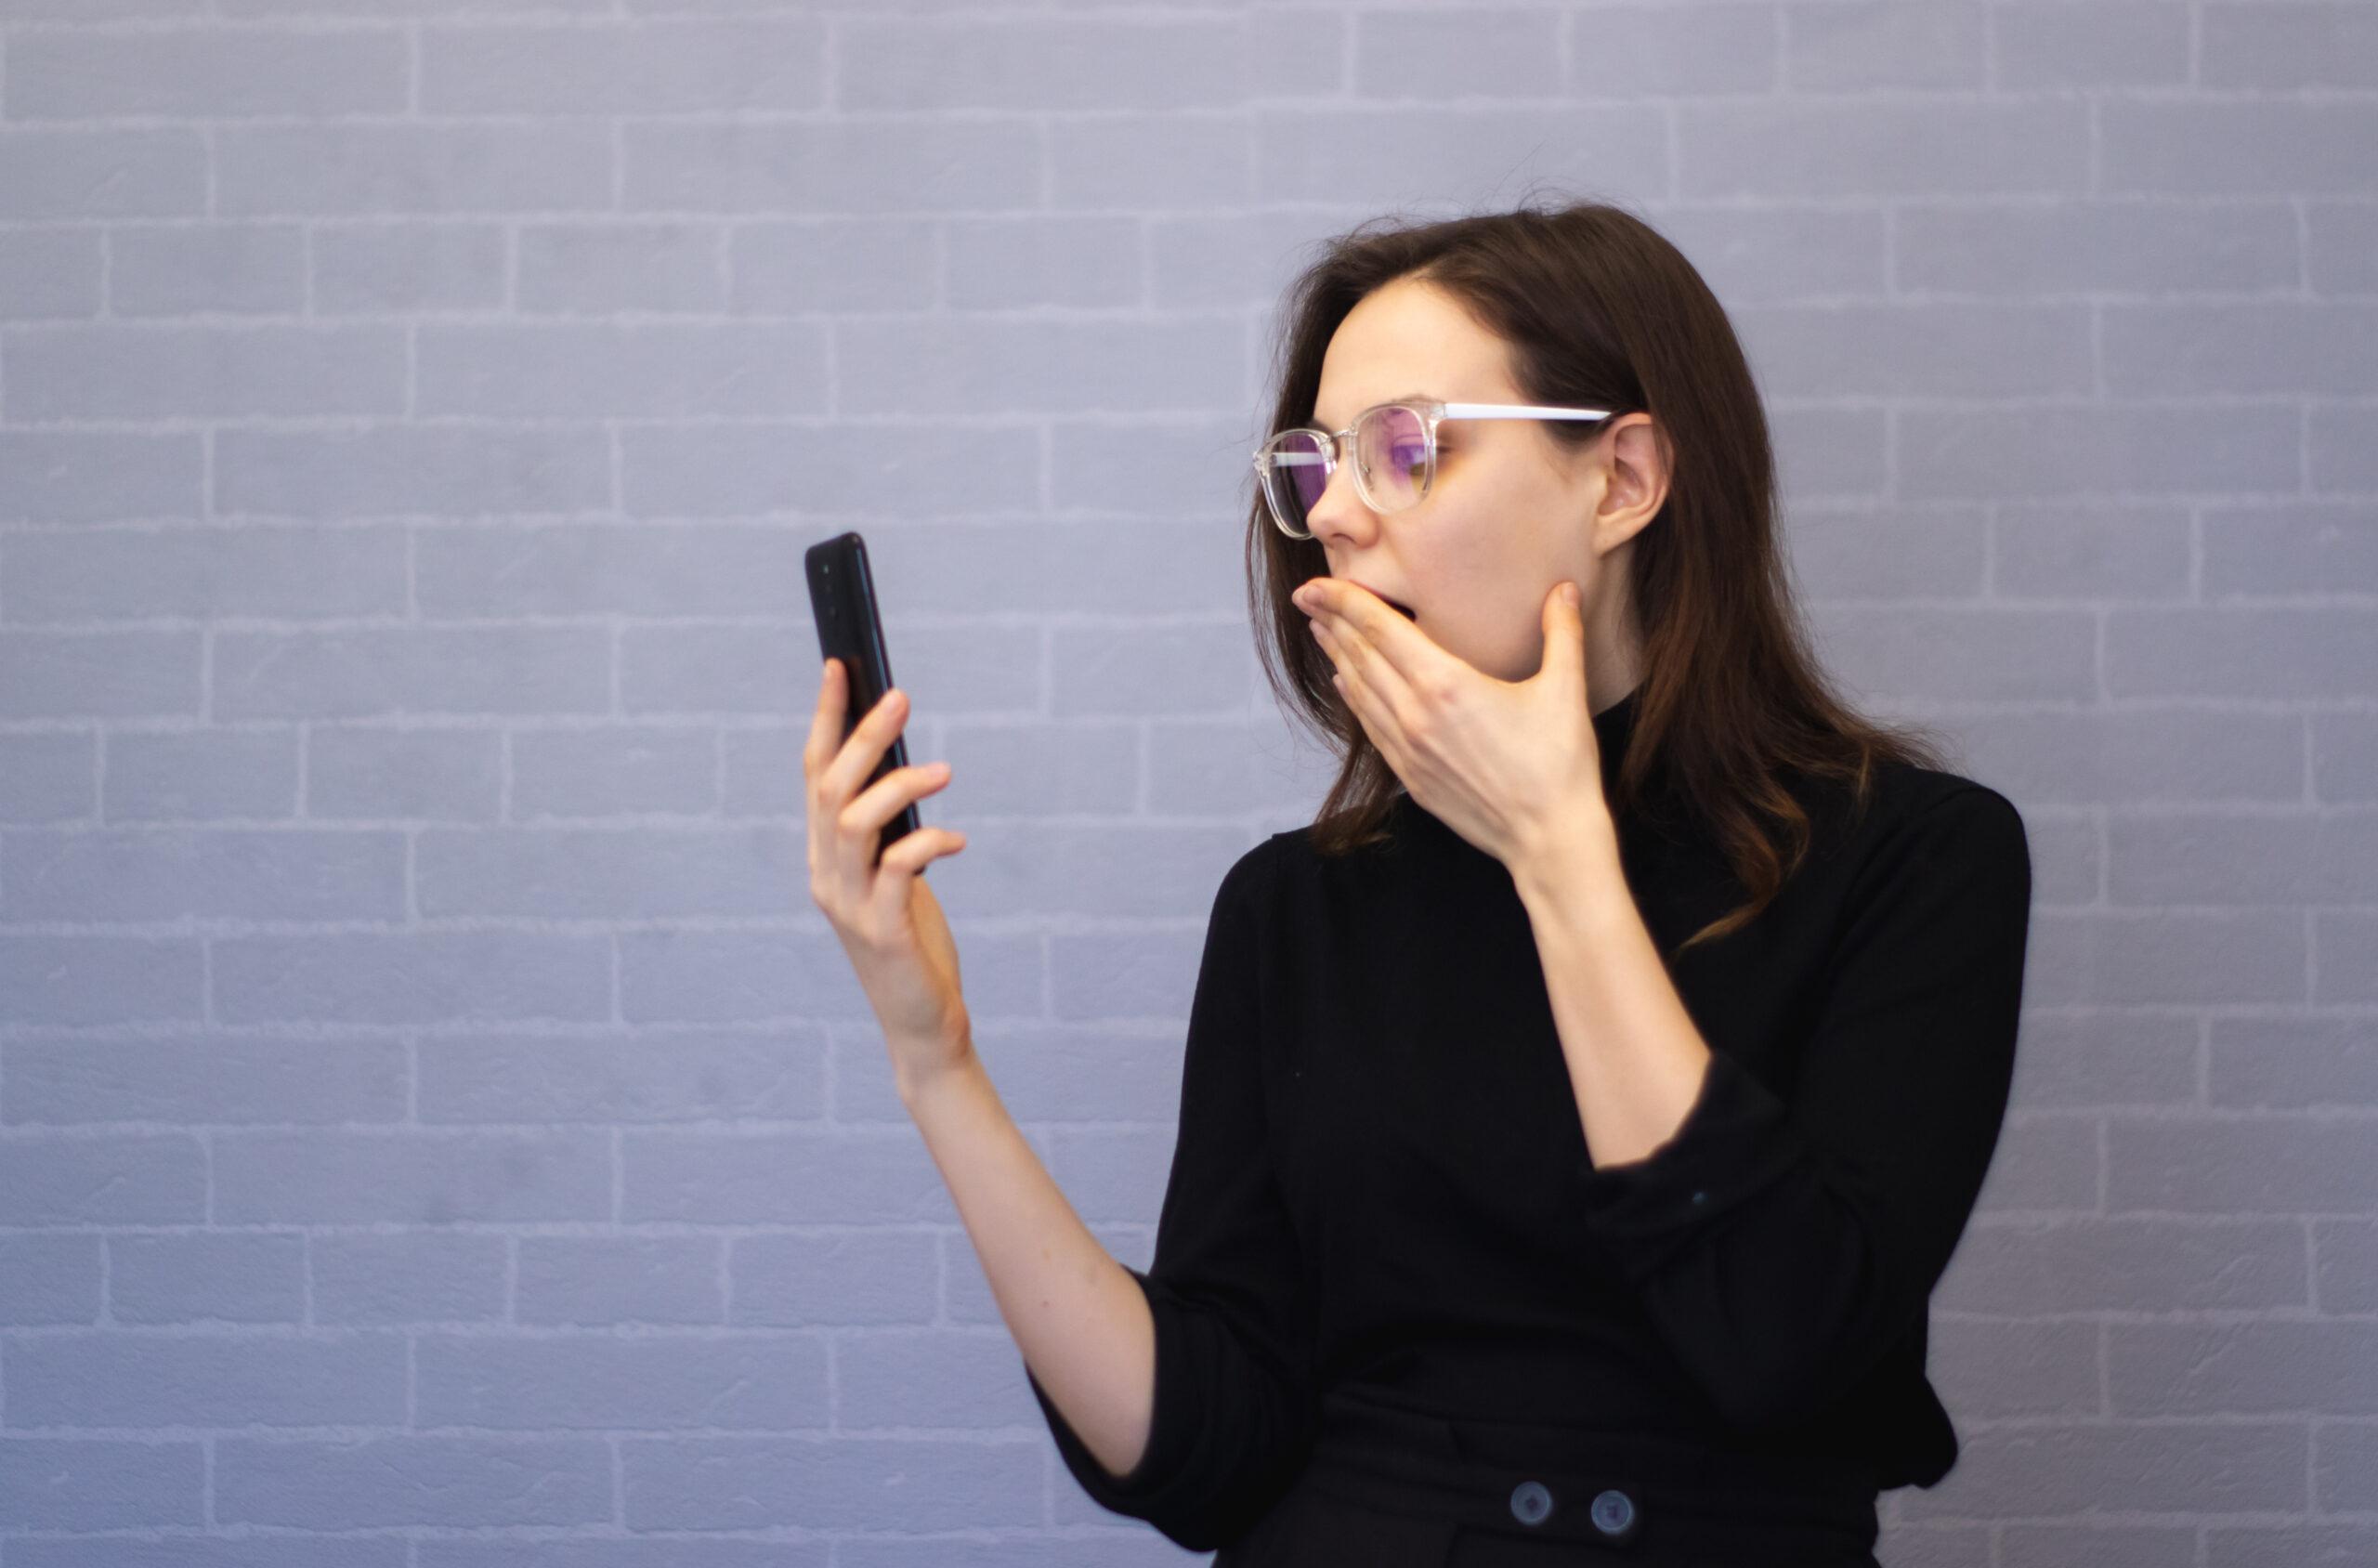 Shocked young woman using mobile phone cover mouth with hand 